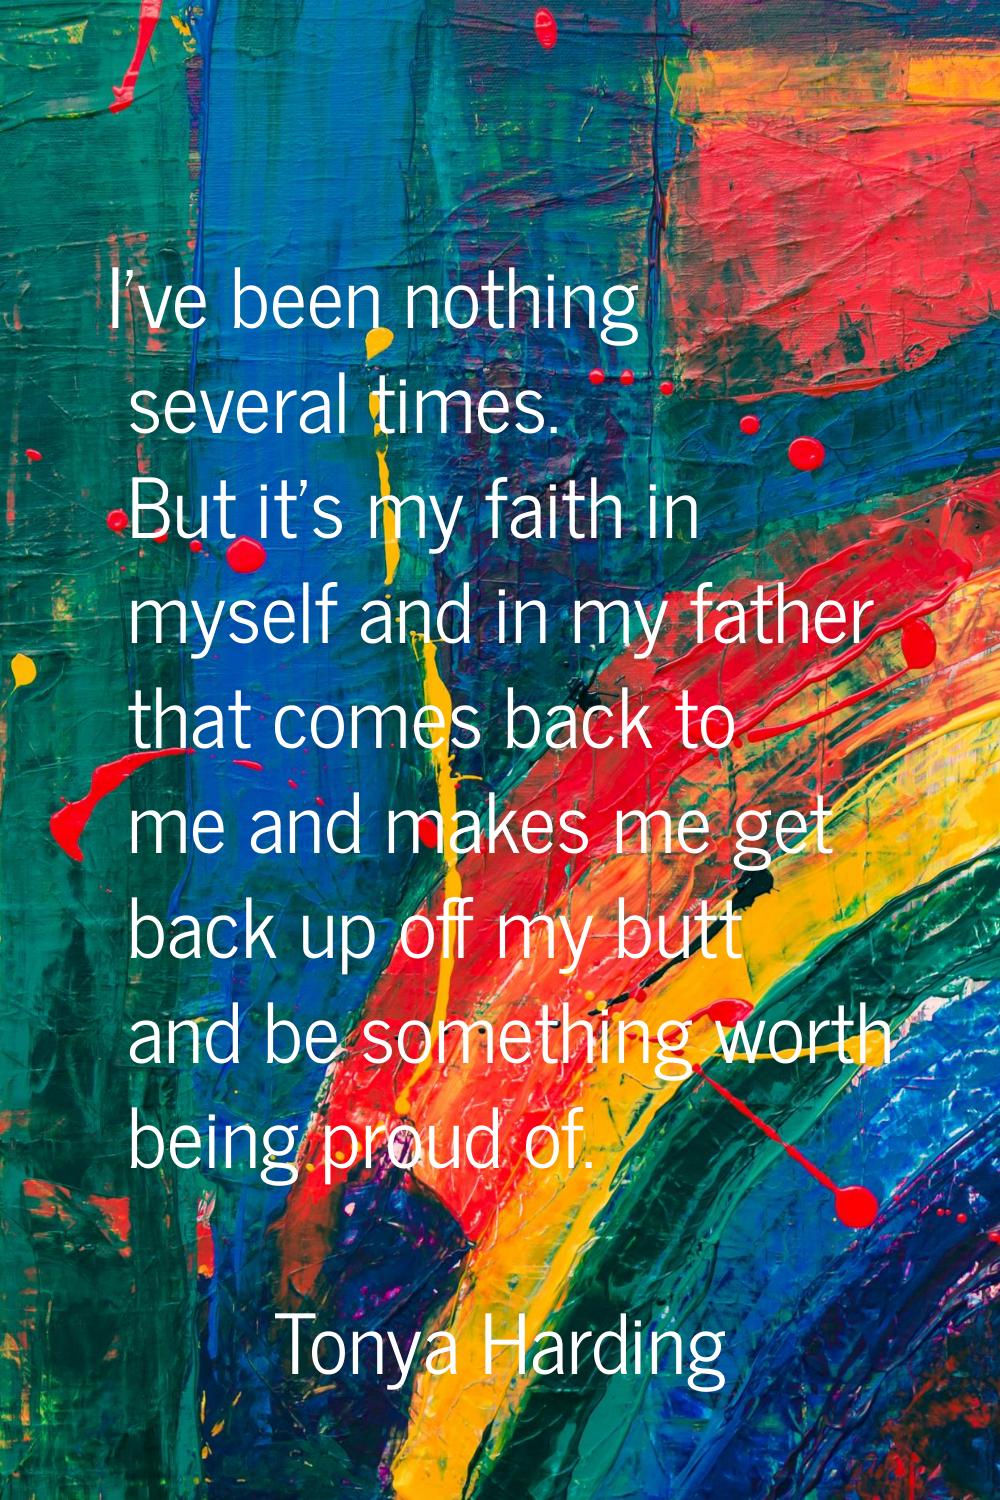 I've been nothing several times. But it's my faith in myself and in my father that comes back to me